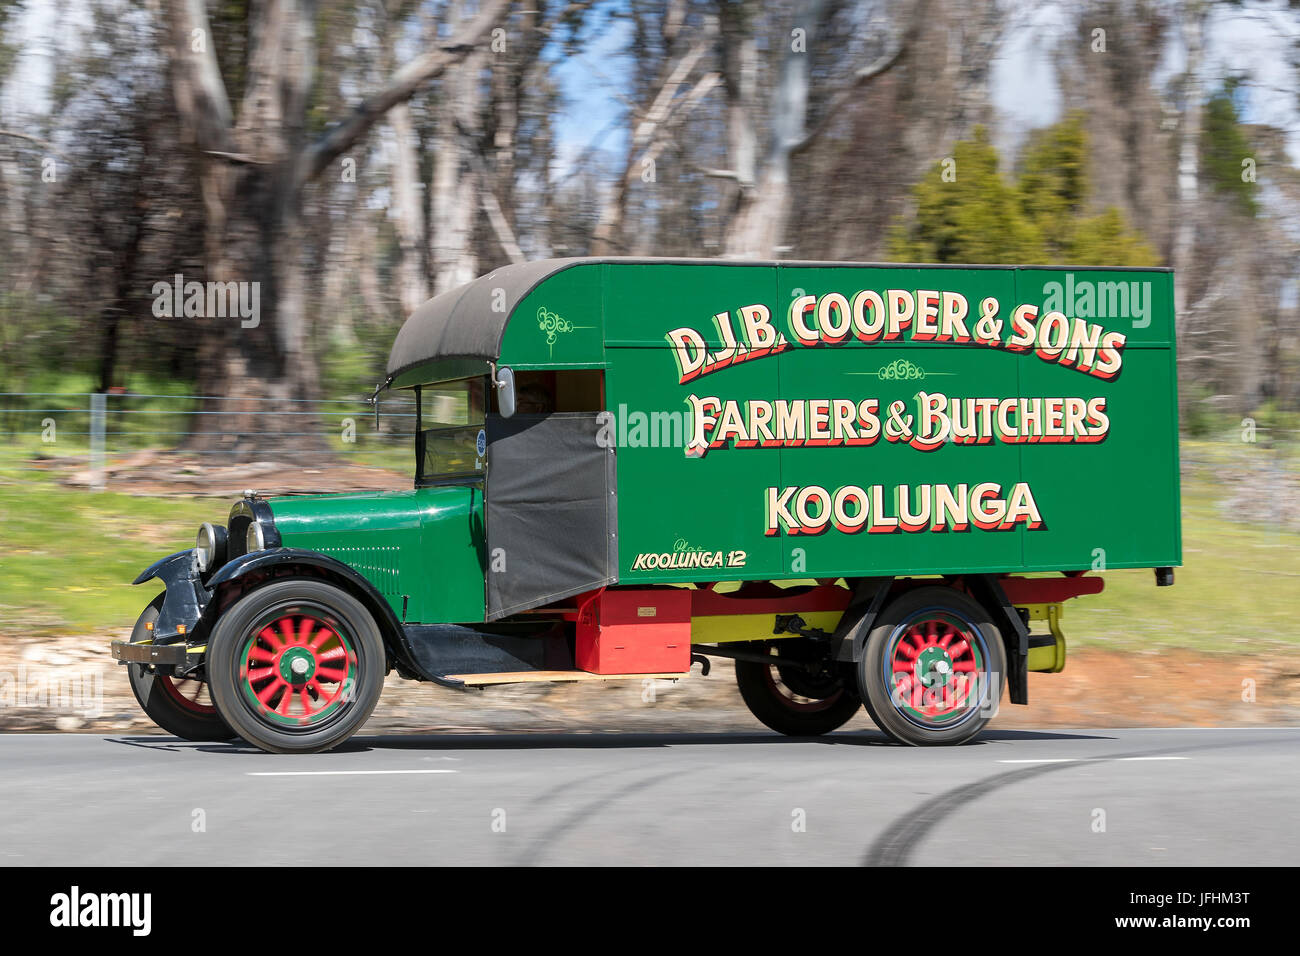 Vintage 1925 Reo SpeedWagon Truck driving on country roads near the town of Birdwood, South Australia. Stock Photo